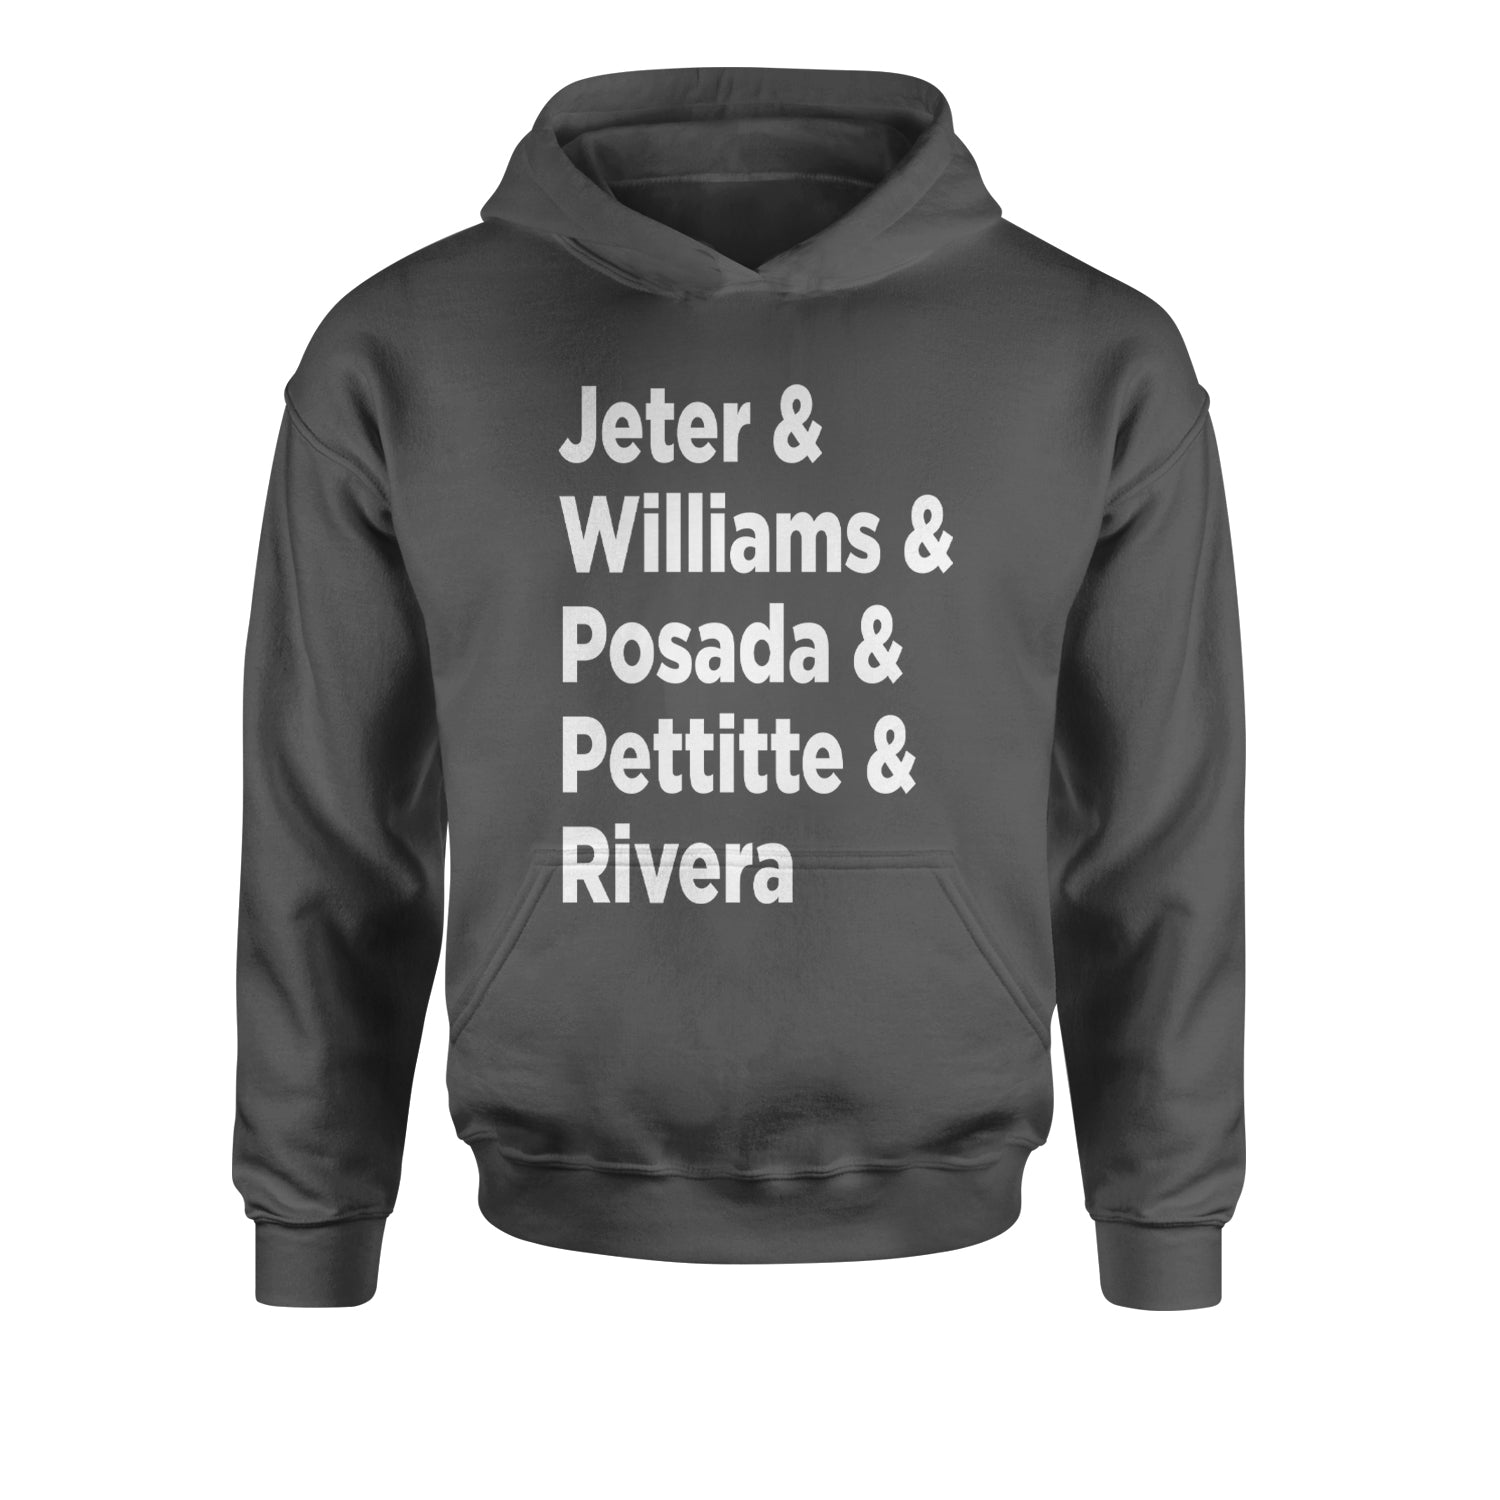 Jeter and Williams and Posada and Pettitte and Rivera Youth-Sized Hoodie baseball, comes, here, judge, the by Expression Tees